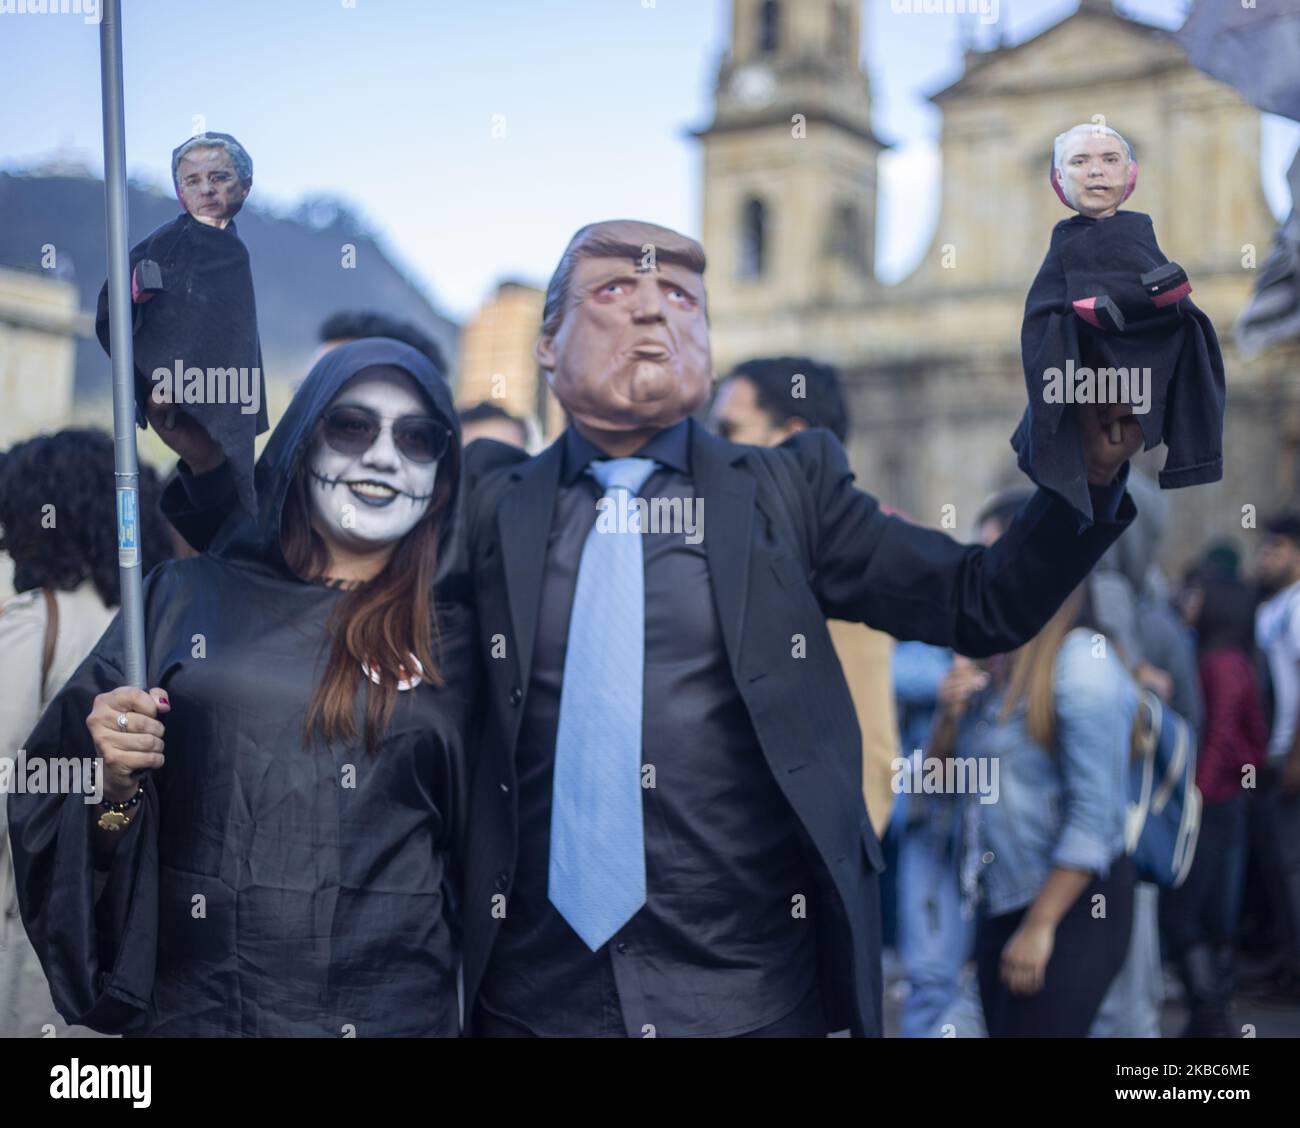 A person with the mask of the president of the United States, Donald Trump is seen during the third national strike in the city of Bogota, Colombia, on 4 December 2019. This is the third national strike in two weeks amid ongoing protests against social, security and economic policies of President Ivan Duque. Five people have died in connection with the protests since November 21. (Photo by Daniel Garzon Herazo/NurPhoto) Stock Photo